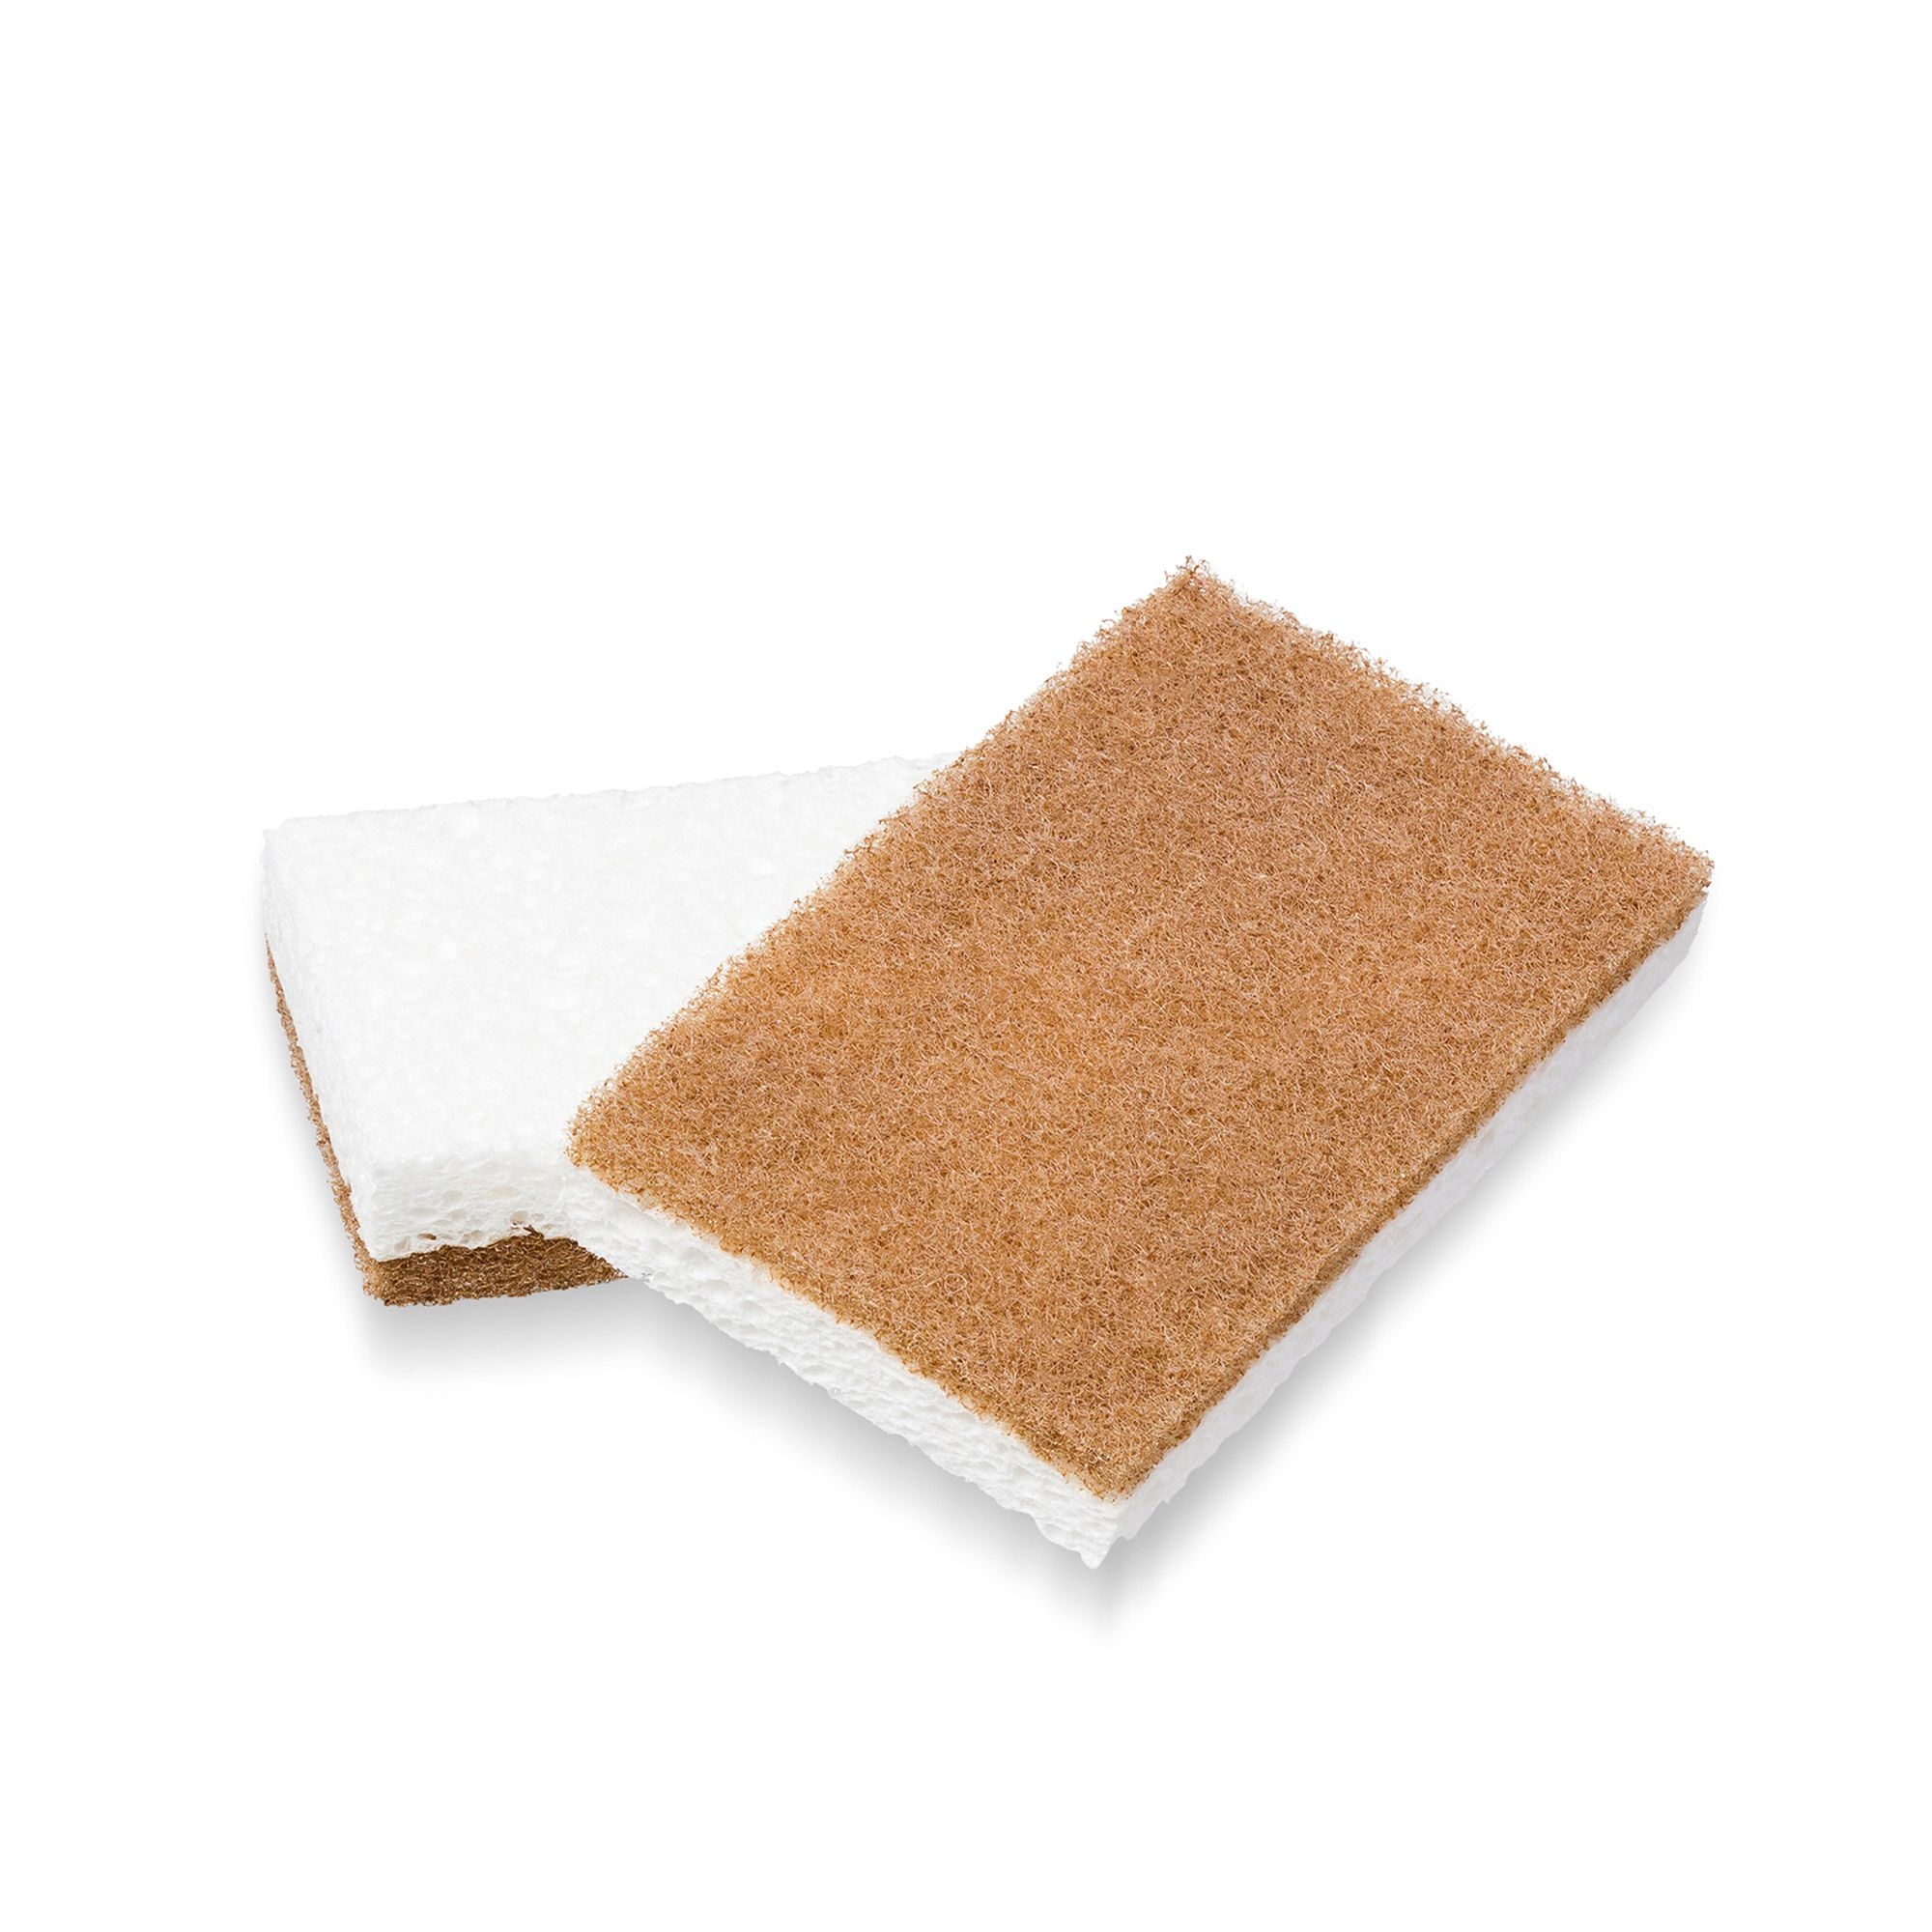 Full Circle - Scouring sponge set of 2 - IN A NUTSHELL